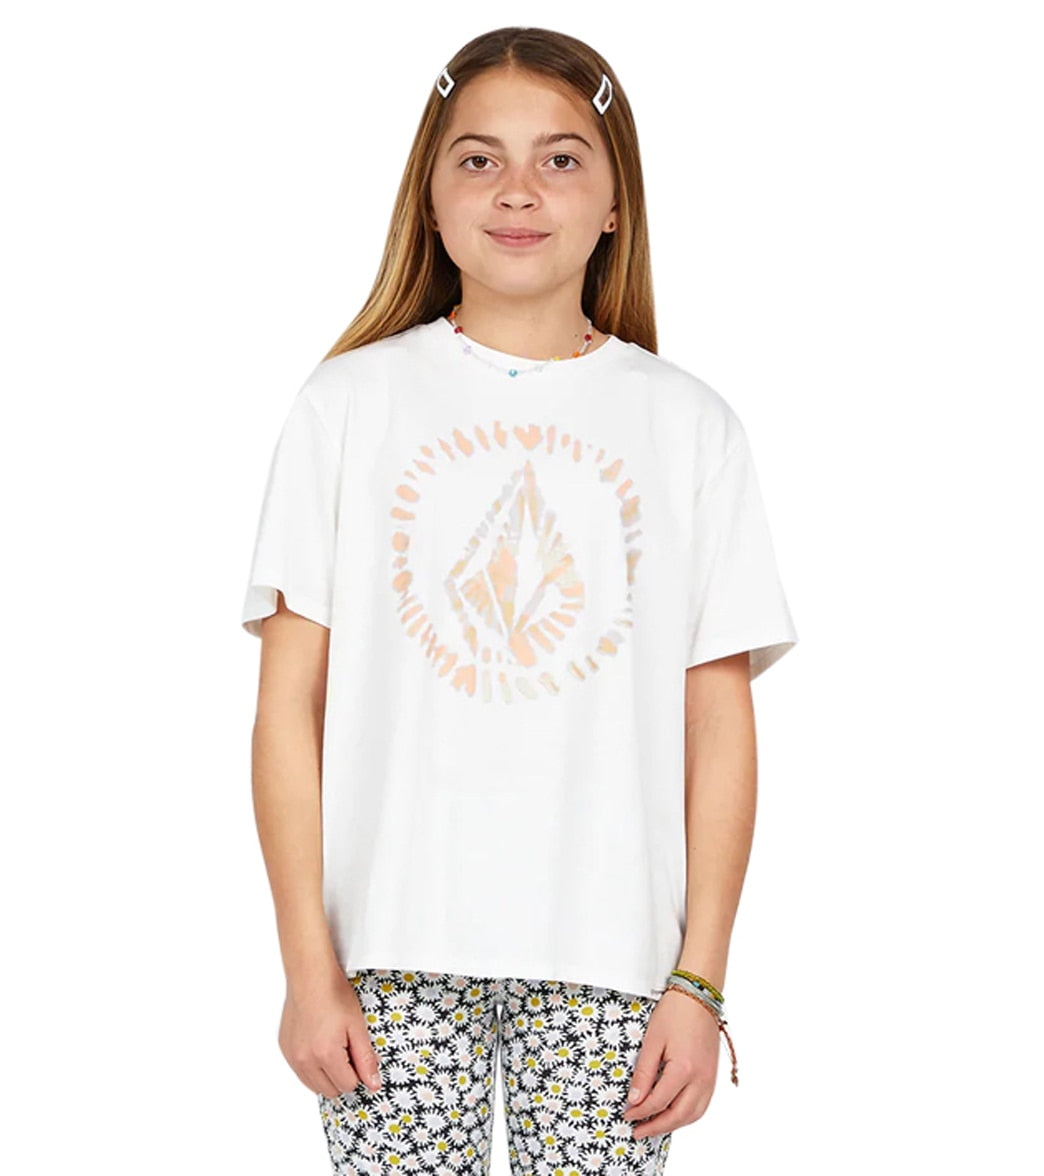 Volcom Girls' Truly Stoked BF Short Sleeve Tee (Big Kid) at SwimOutlet.com